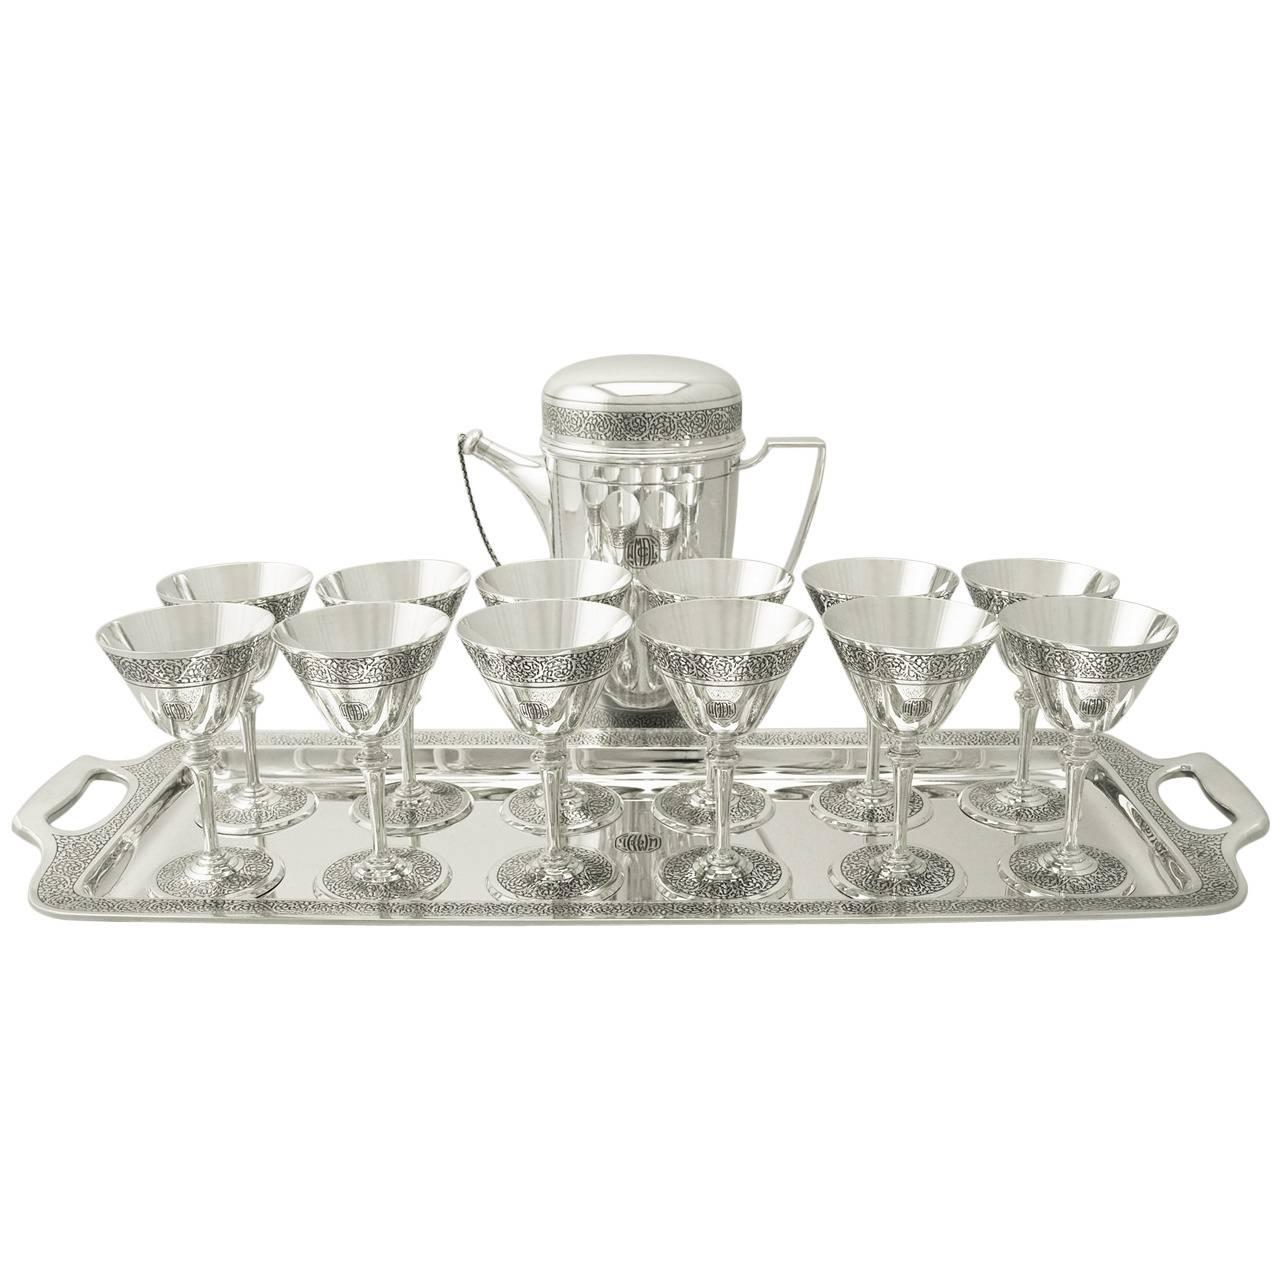 Antique Art Deco American Sterling Silver Cocktail Set by Tiffany & Co.